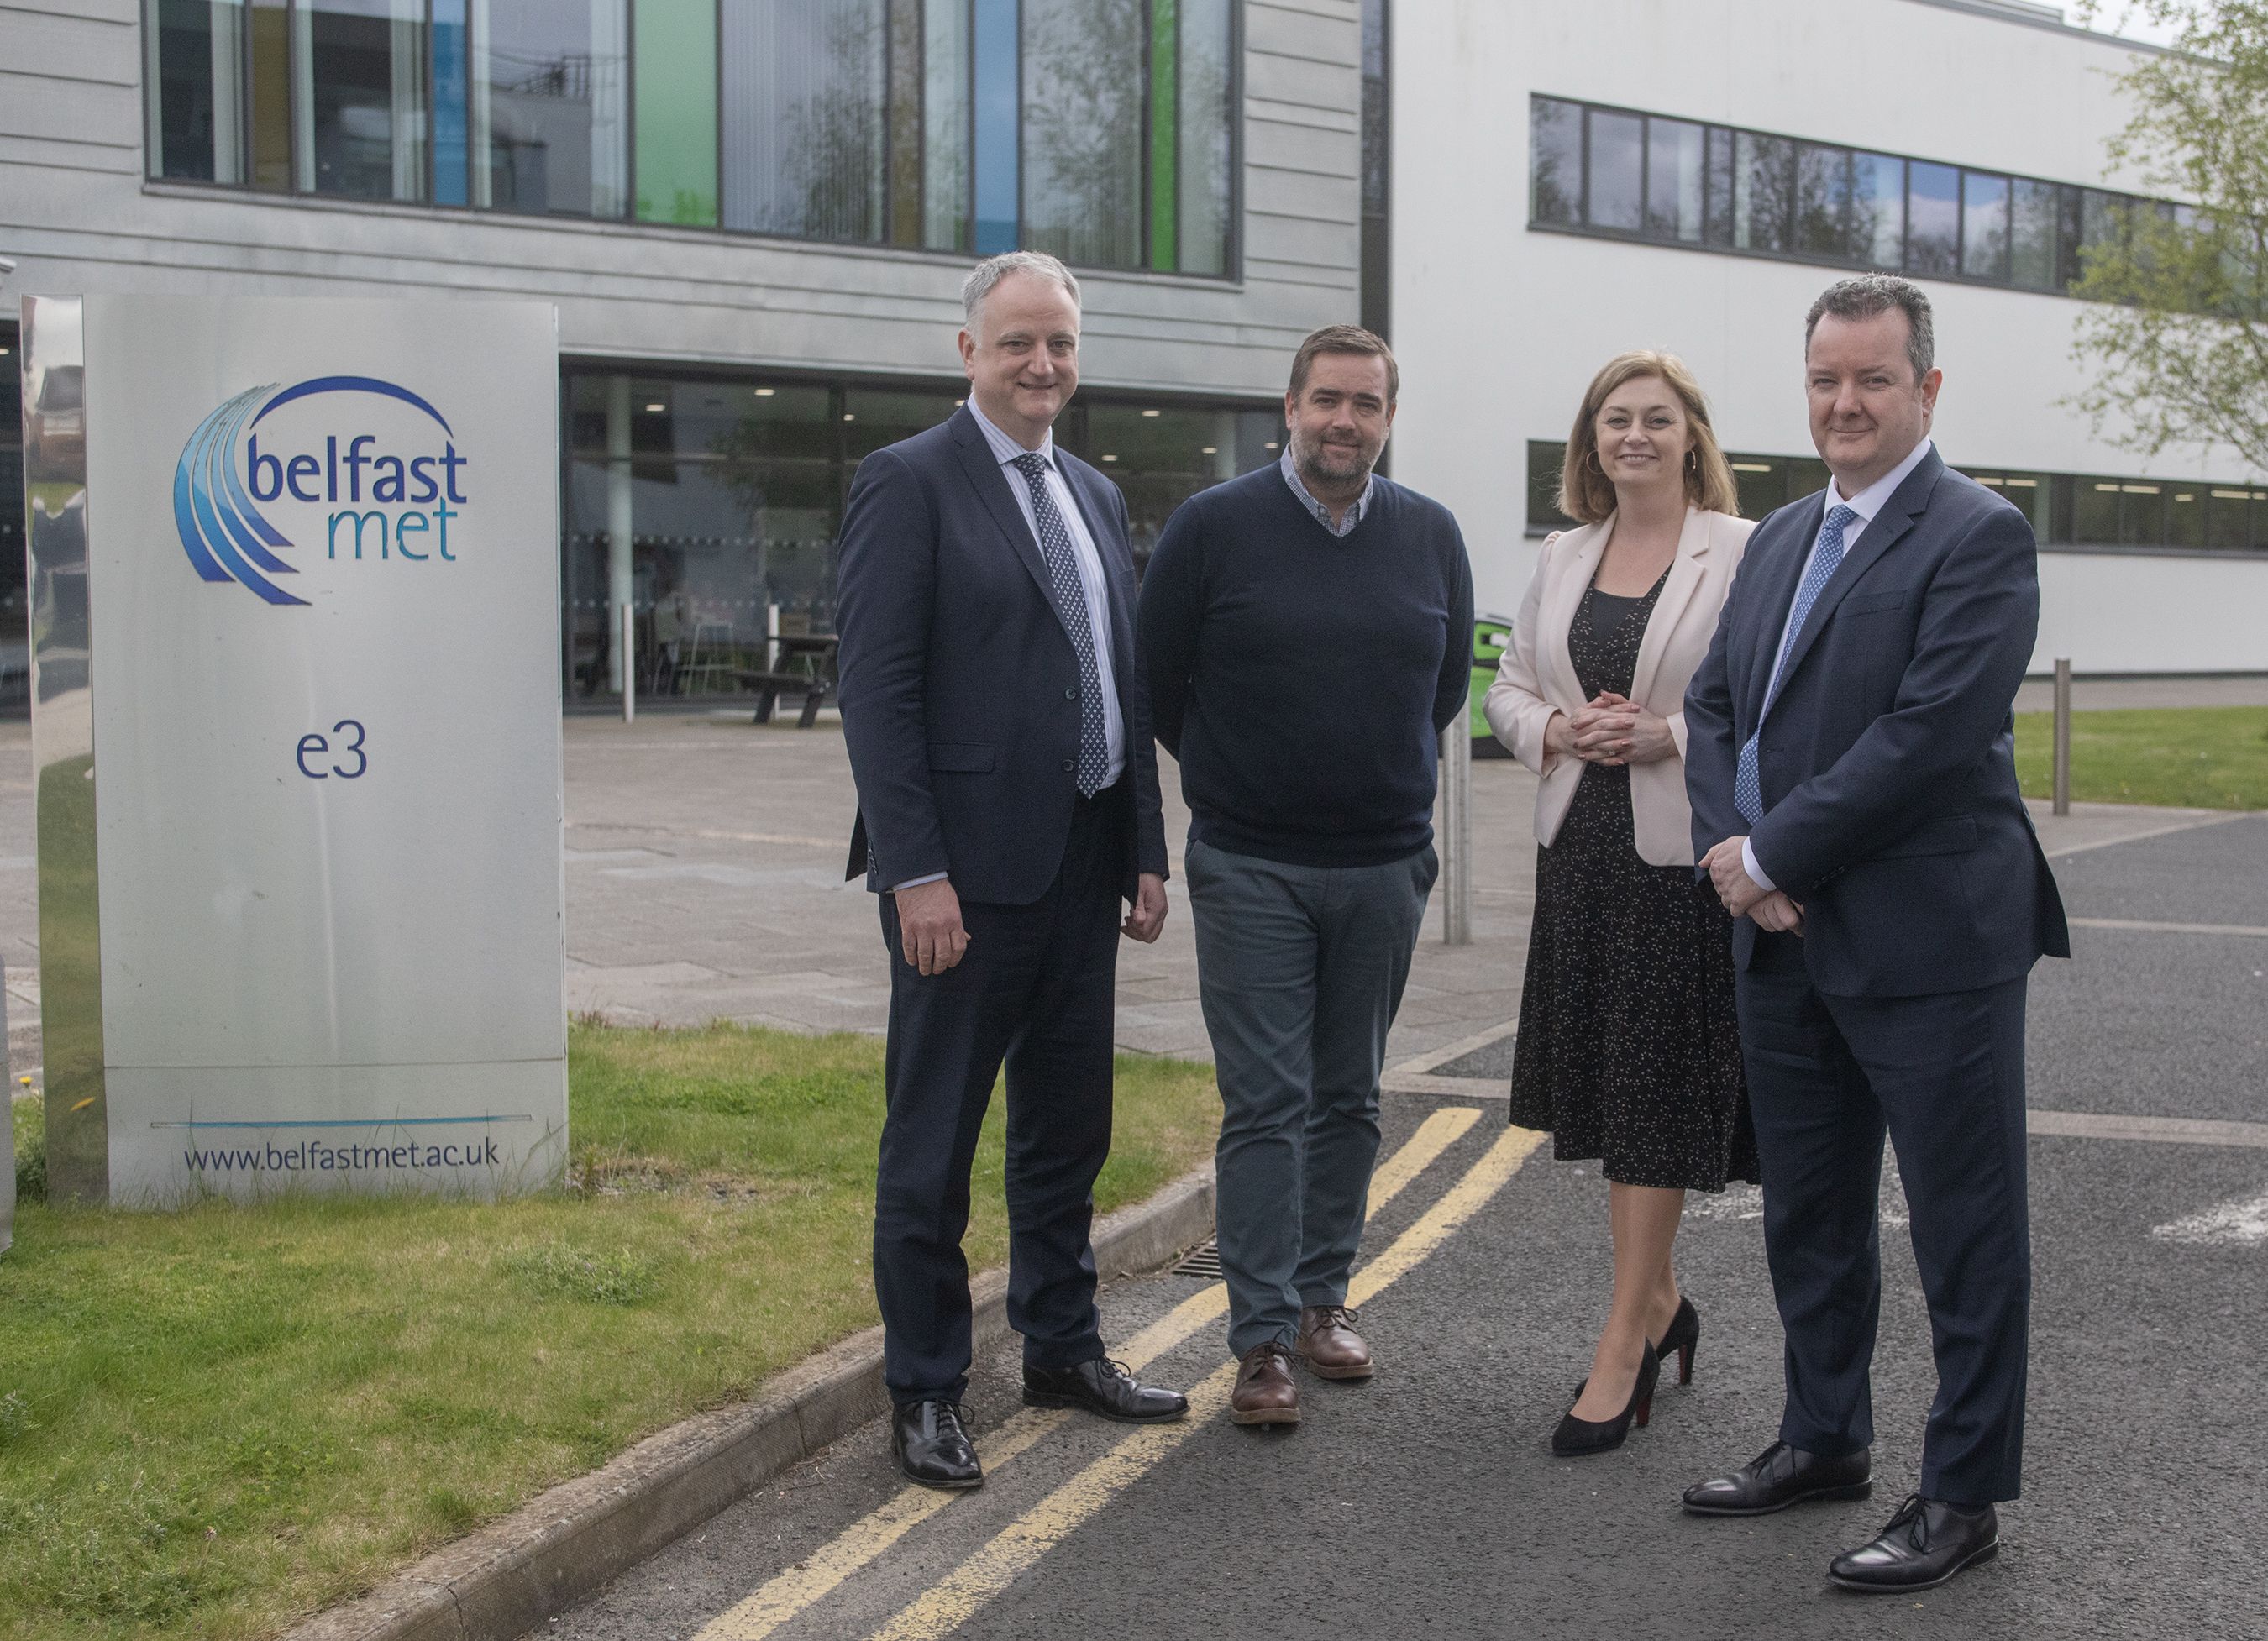 WEST BELFAST MEETING: John Healy (Chair of Invest NI), Seamus O\'Prey (CEO, The Ortus Group), Susan O’Kane (Invest NI) and Kieran Donoghue (CEO of Invest NI)